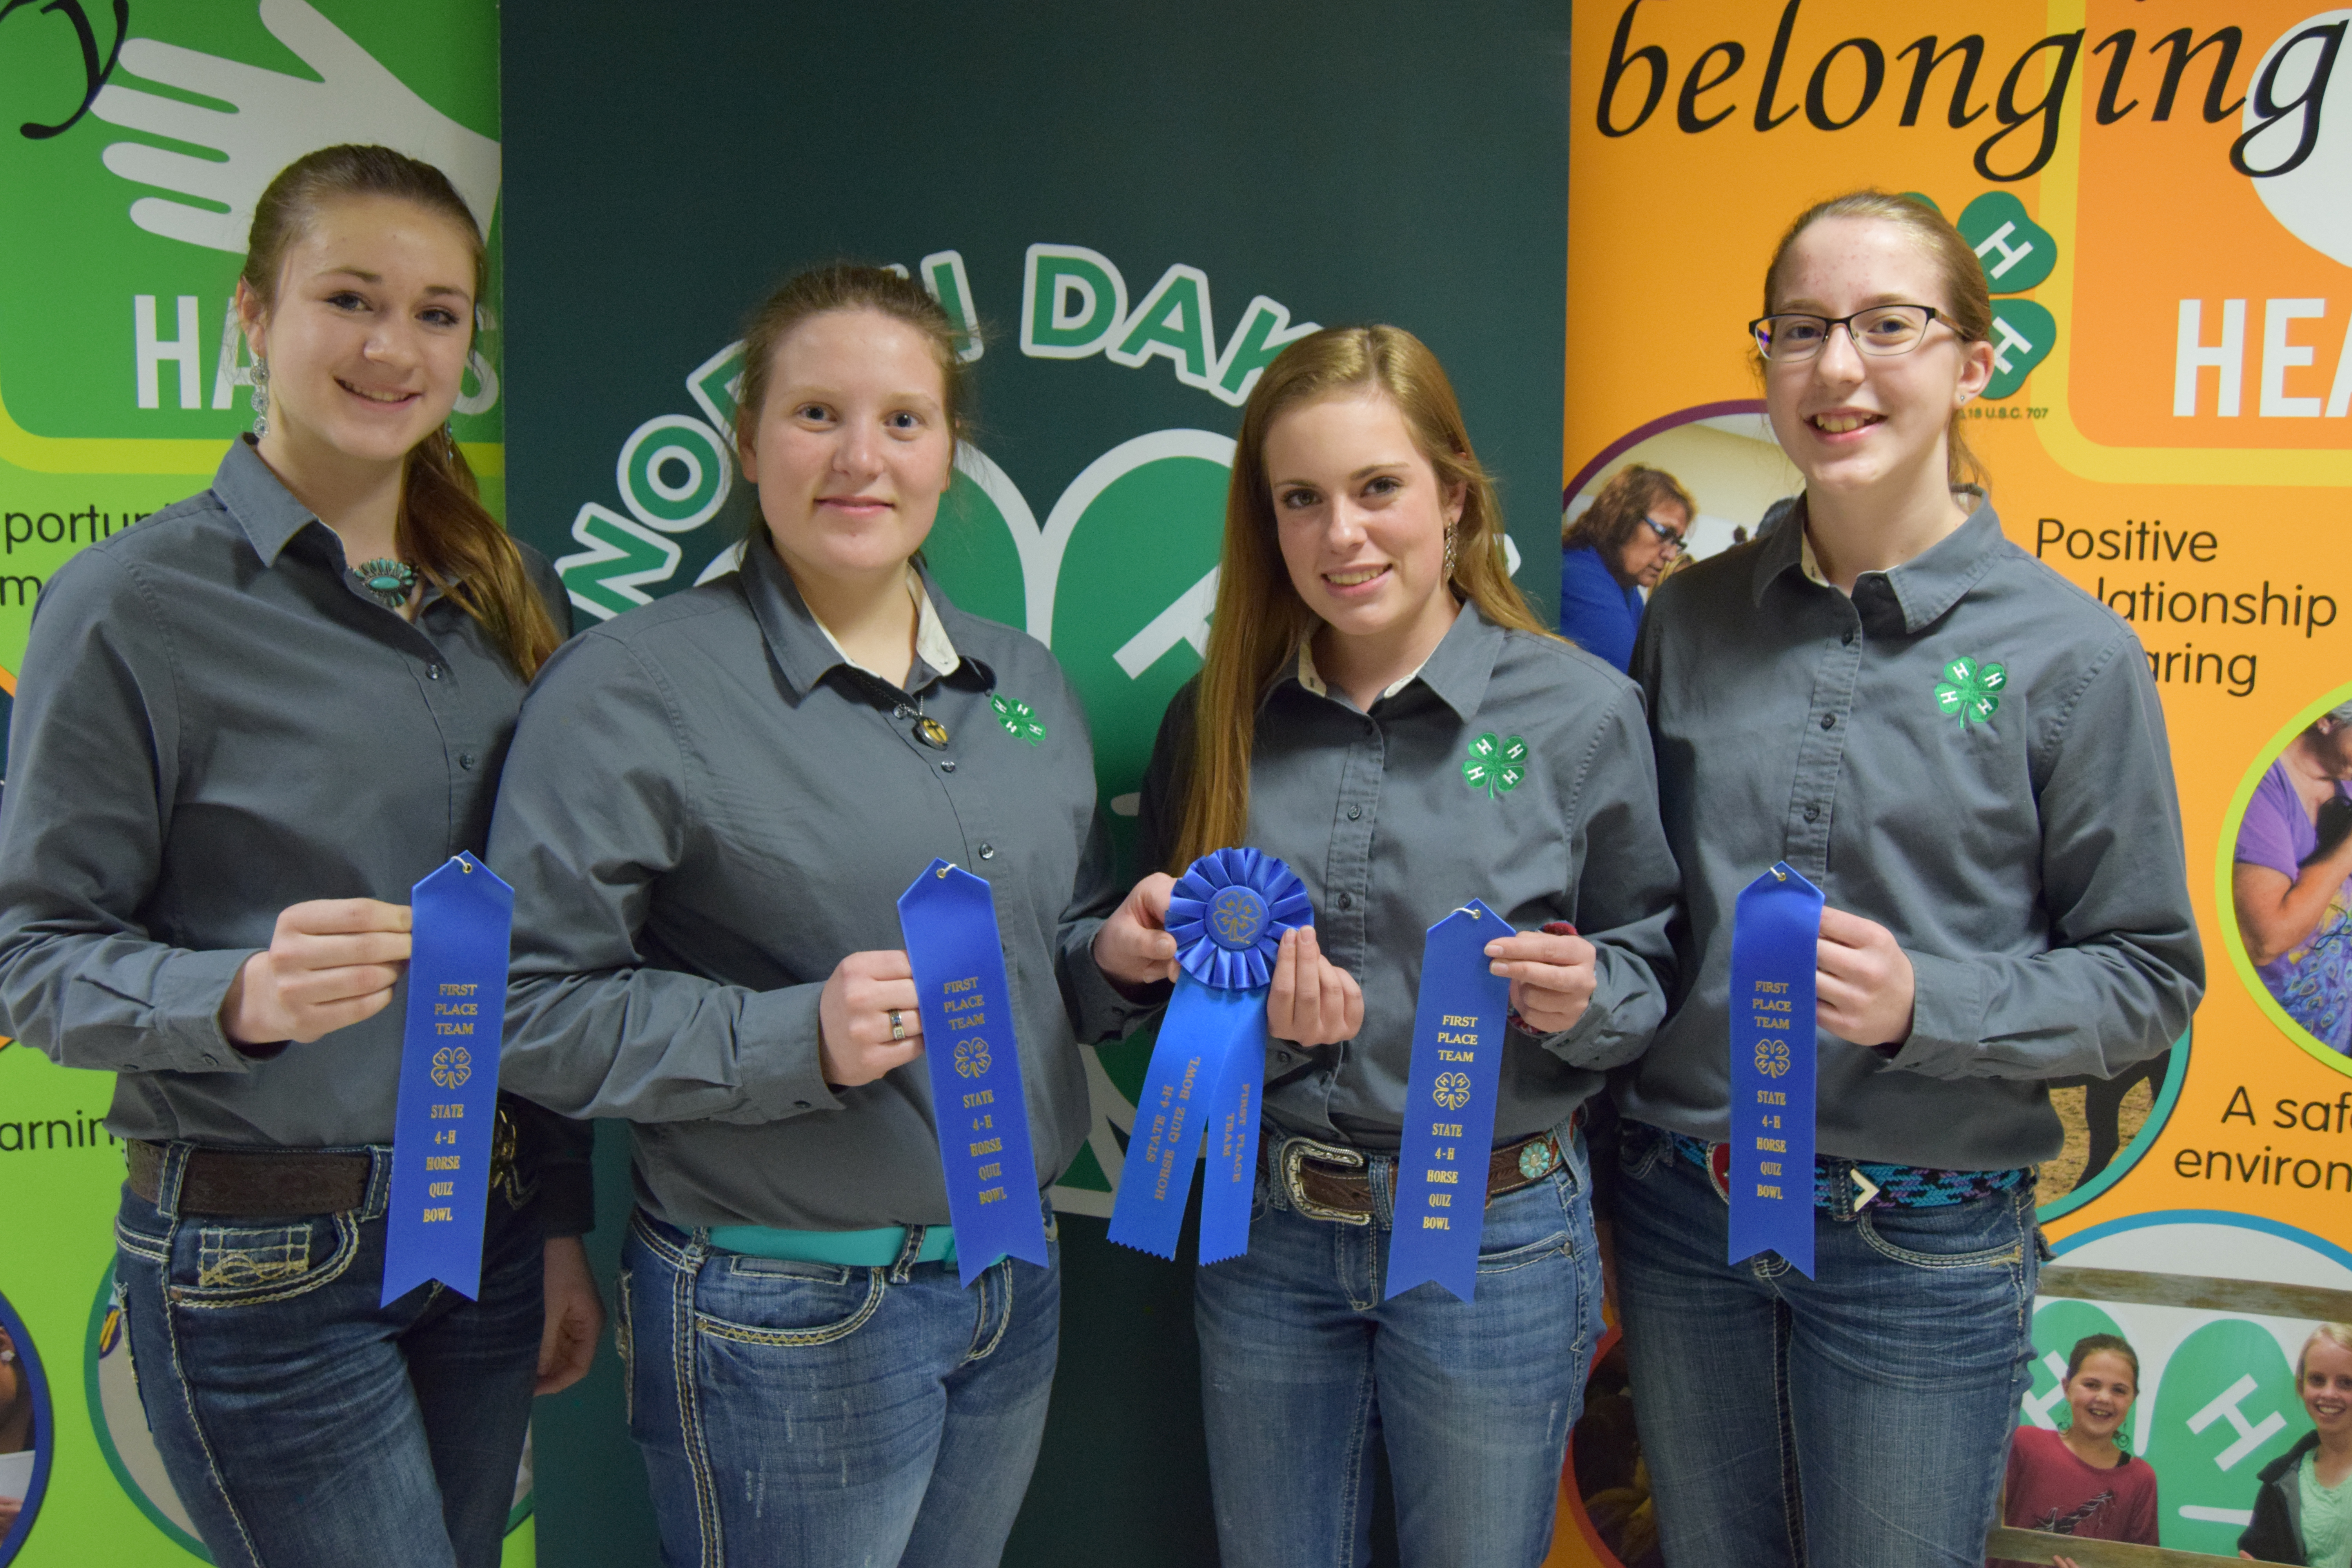 A team from Sargent County placed first in the horse quiz bowl competition. Pictured are (from left): Allie Bopp, Jacy Bopp, Kassidy Larson, Kari Fuhrman.